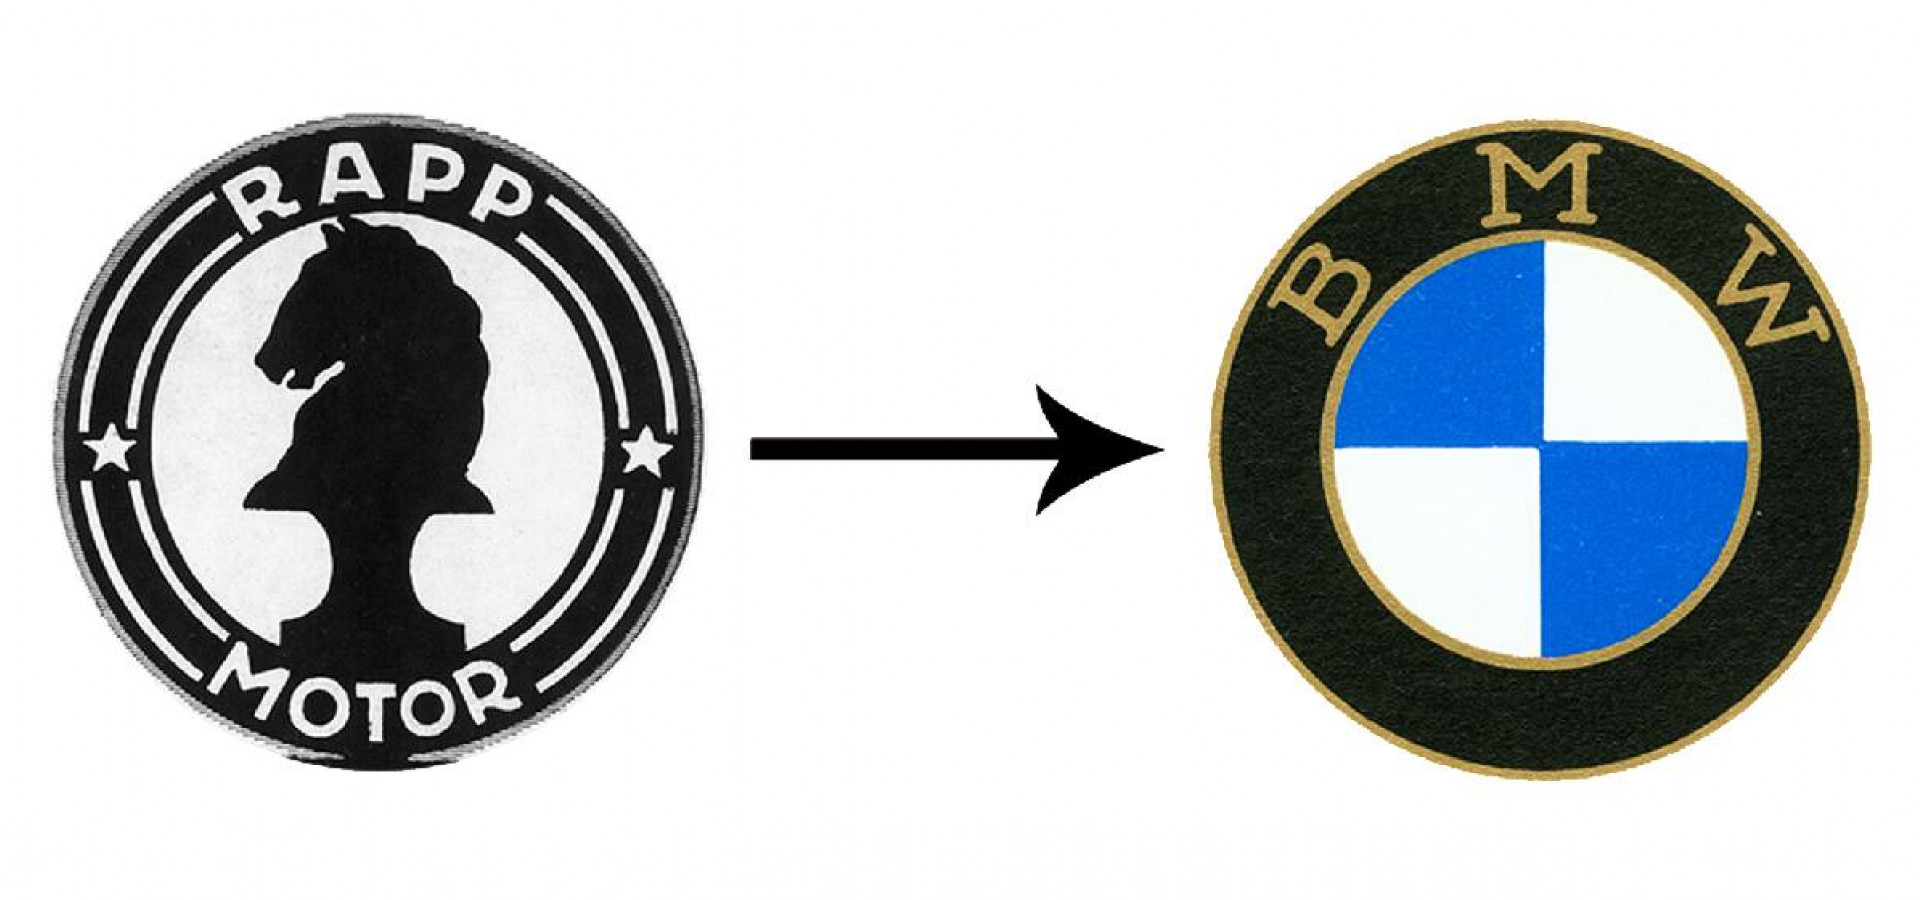 BMW Logo Meaning And History Of BMW Emblem